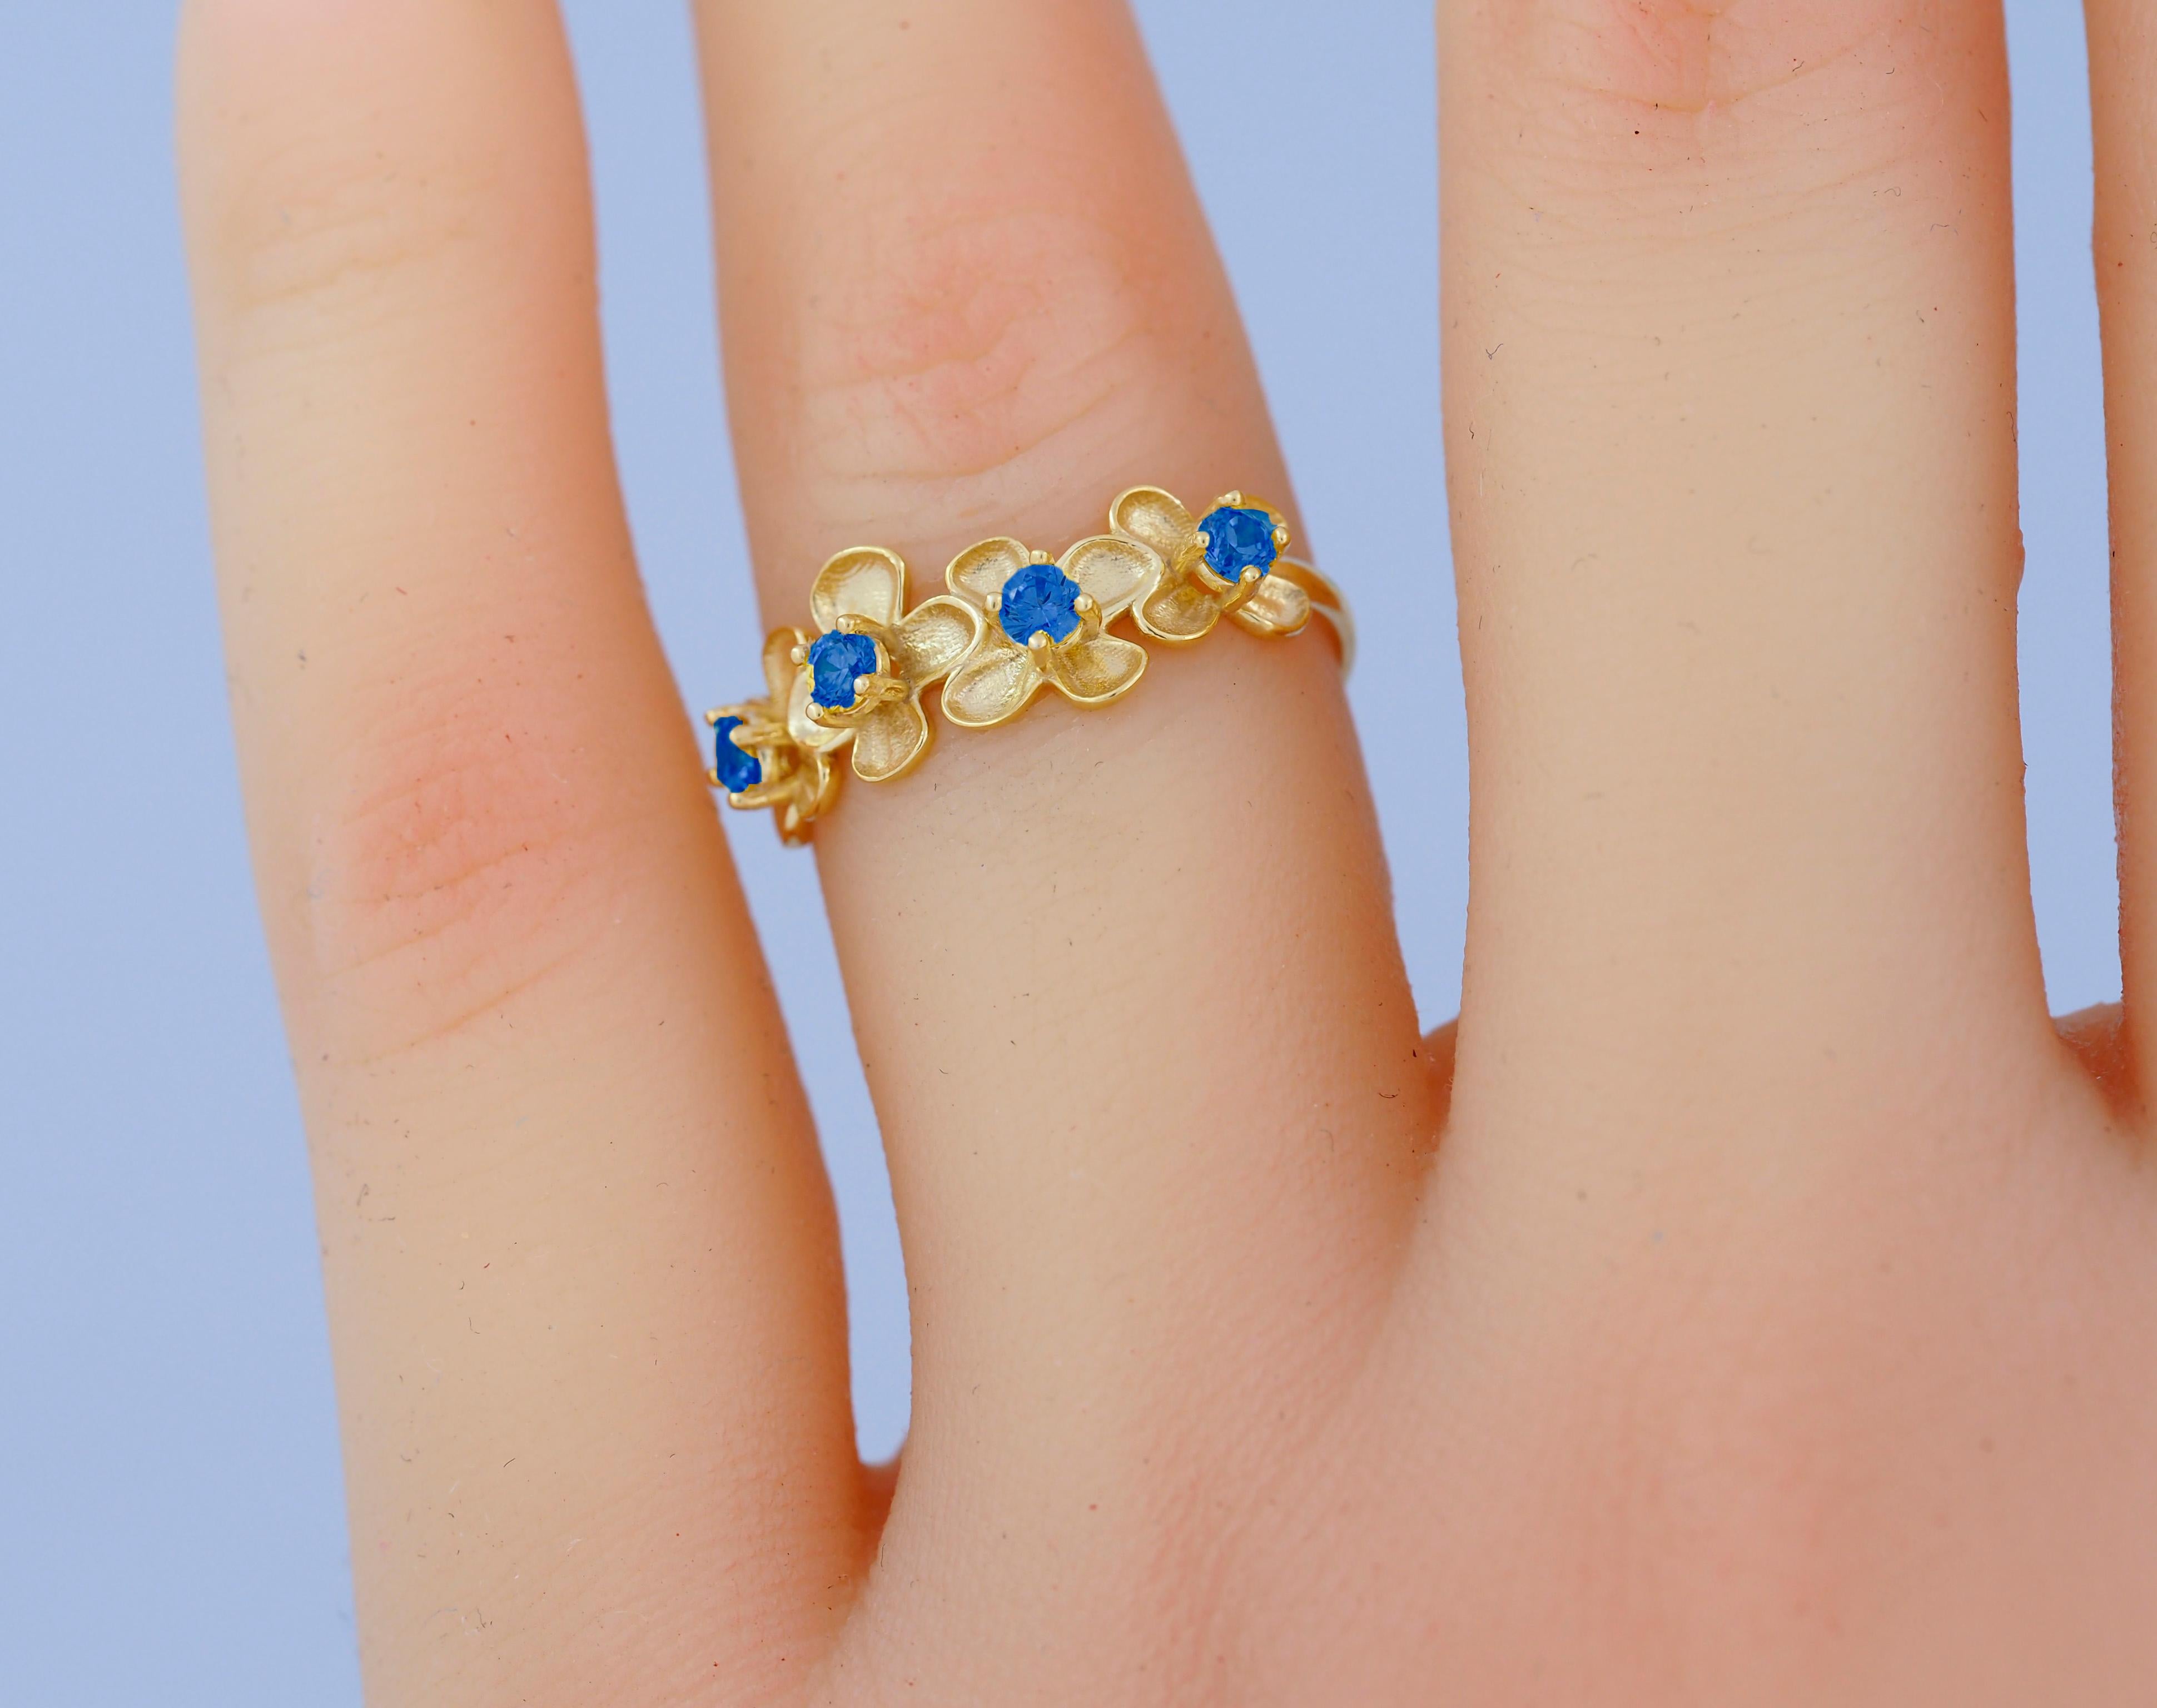 Flower 14k gold ring
Lab sapphires 14k gold ring. Daisy flower gold ring. Flower bouquet ring. Blue gemstone ring.

Metal: 14k solid gold
Weight: 2 gr depends from size

Gemstones
Set with lab sapphires
Color - blue, 
Cut: round

auction